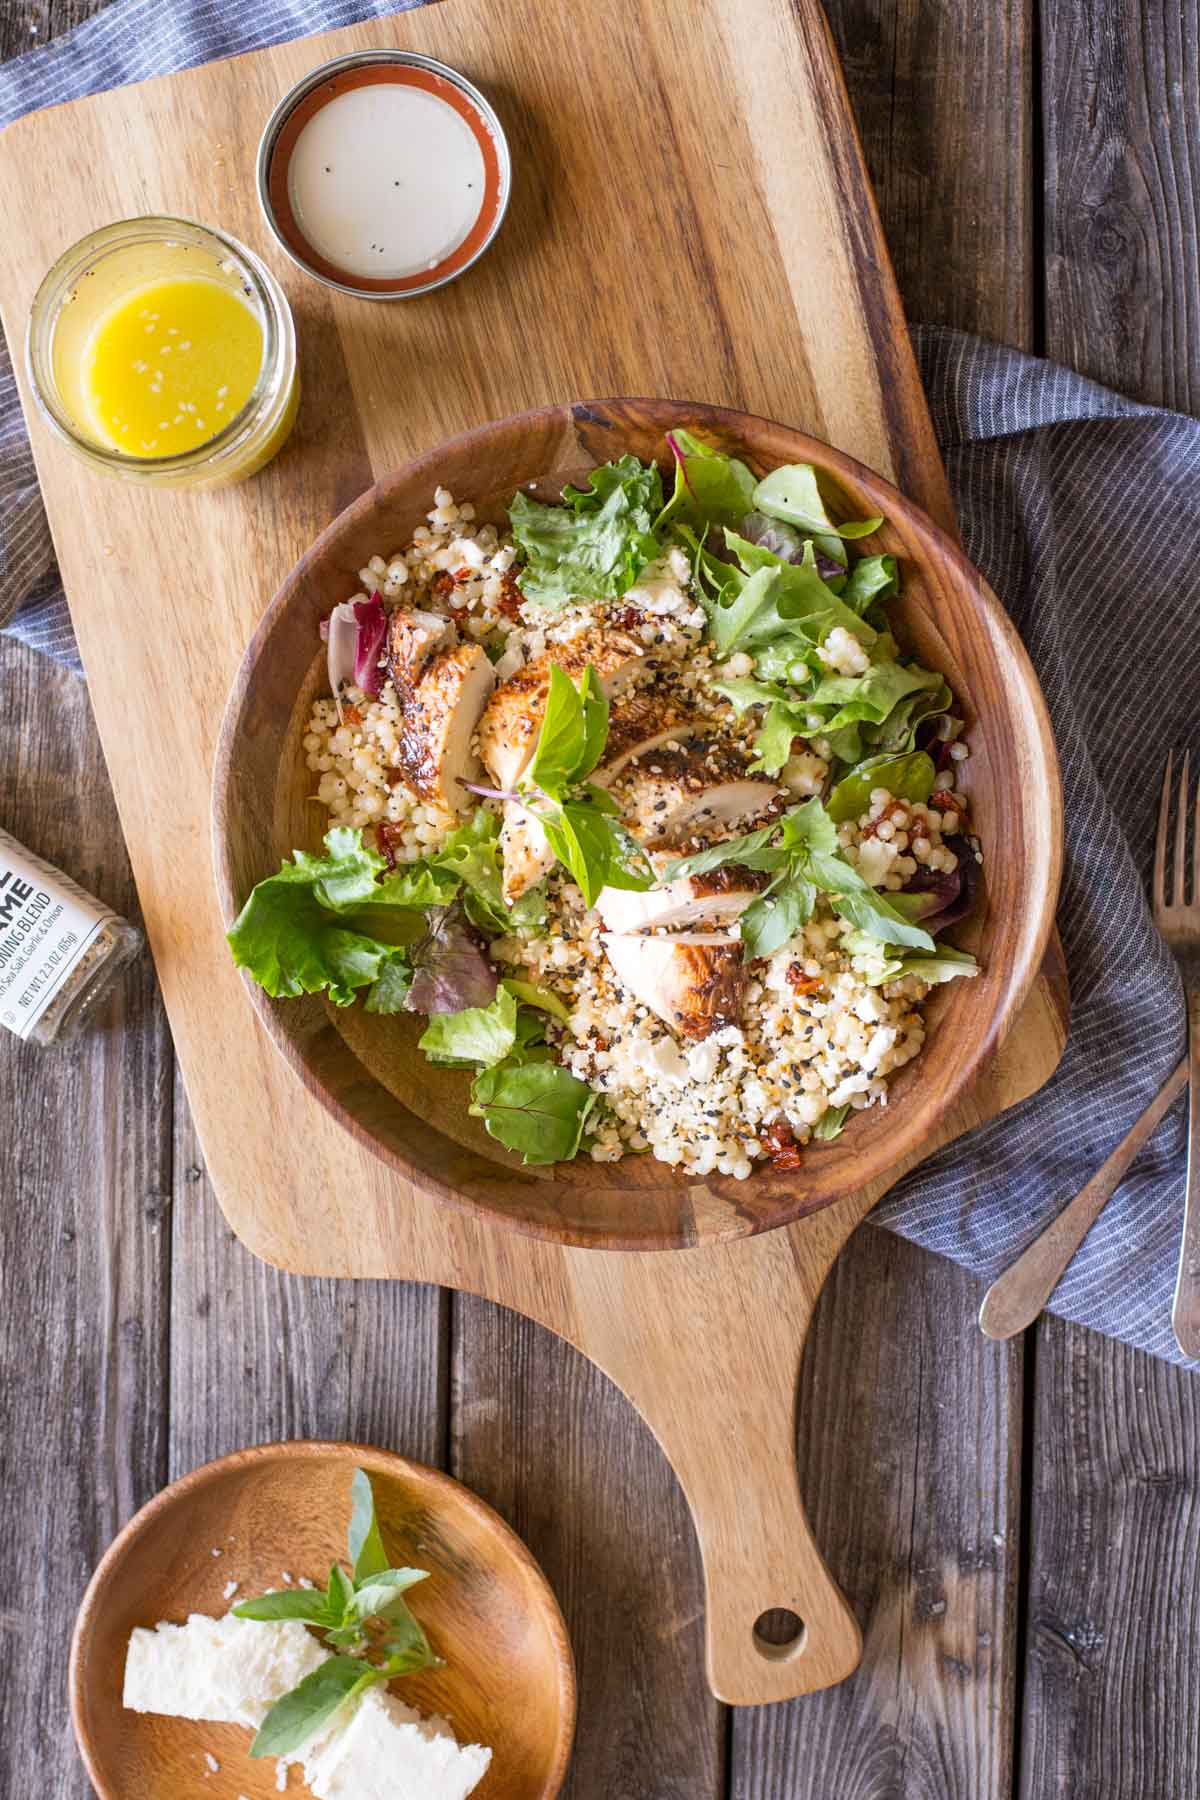 Israeli Couscous Salad with Honey Lemon Vinaigrette in a wooden bowl on a wooden cutting board.